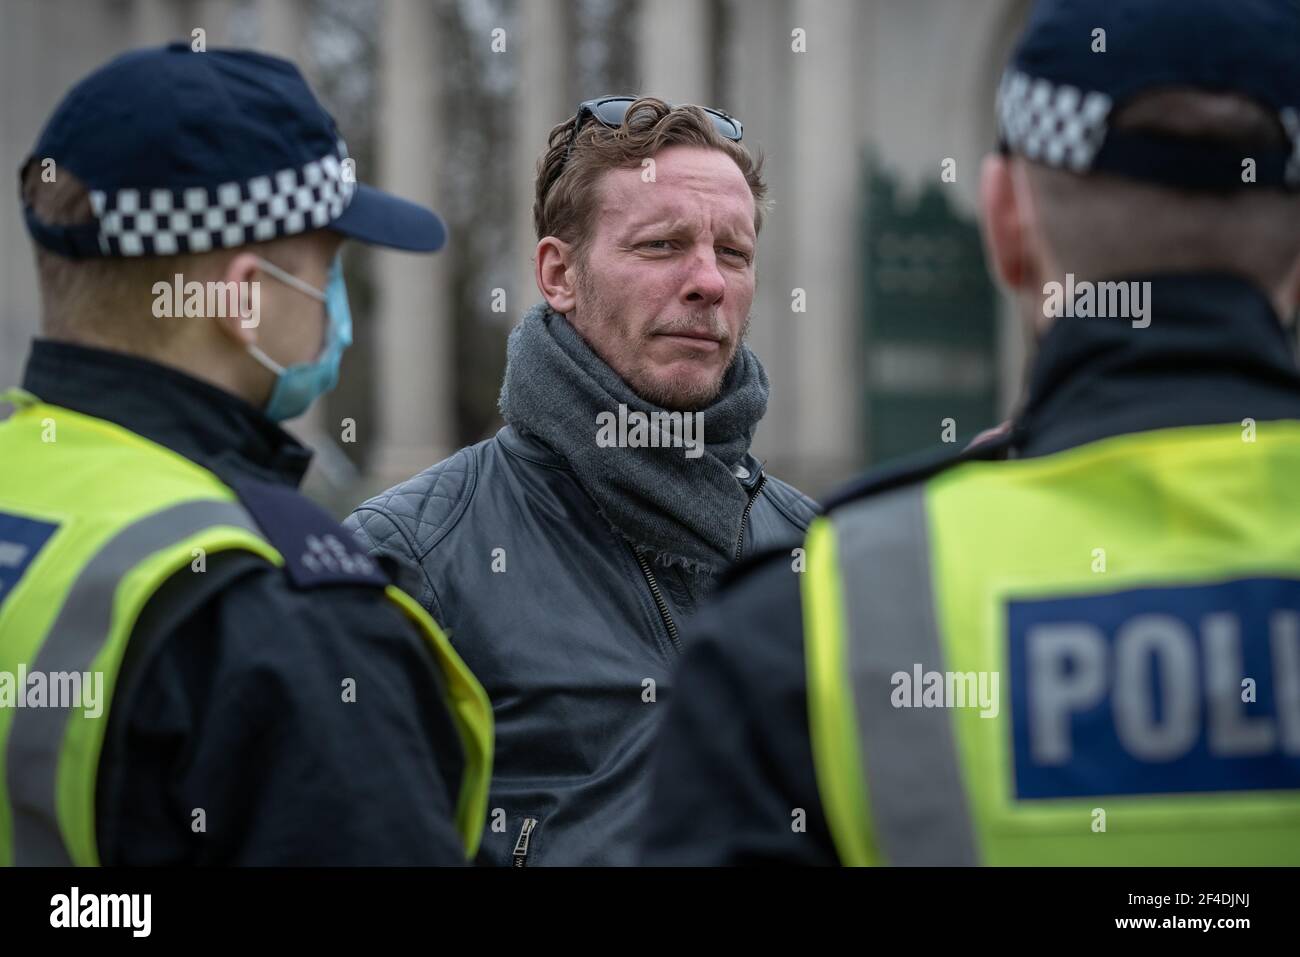 Laurence Fox, former actor and current leader of Reclaim party, is told to move on by police during an attempted anti-lockdown gathering in Hyde Park. Stock Photo